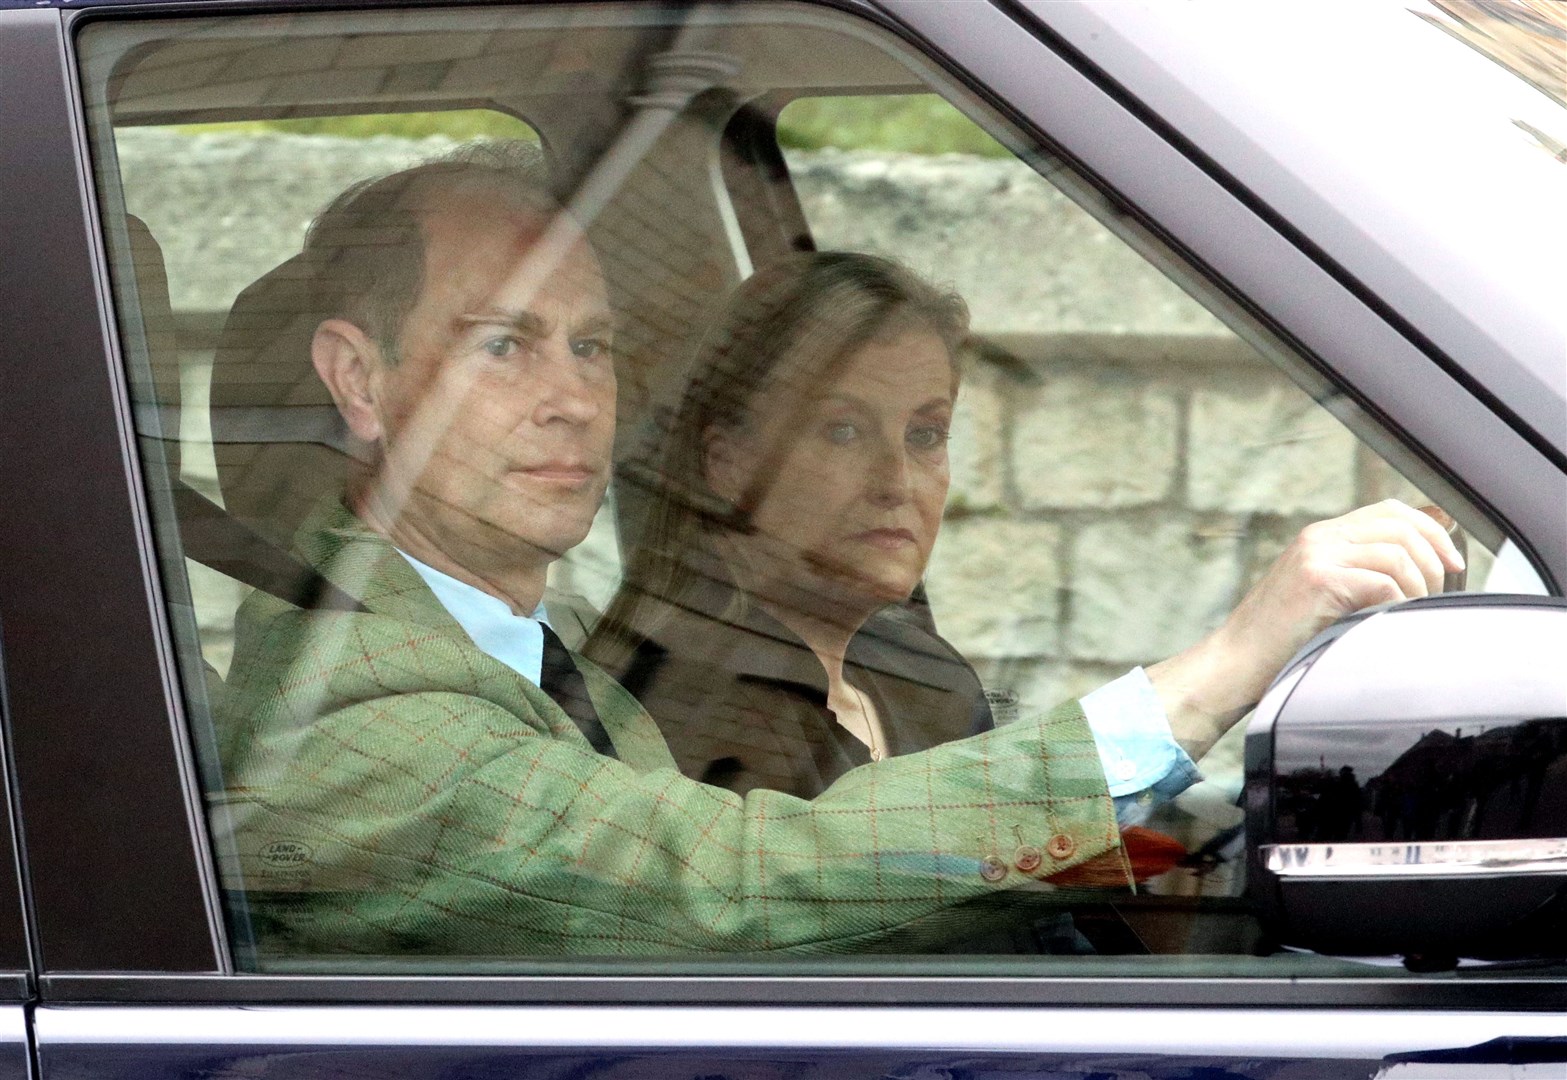 The Earl and Countess of Wessex arrive at Windsor Castle (Steve Parson/PA)